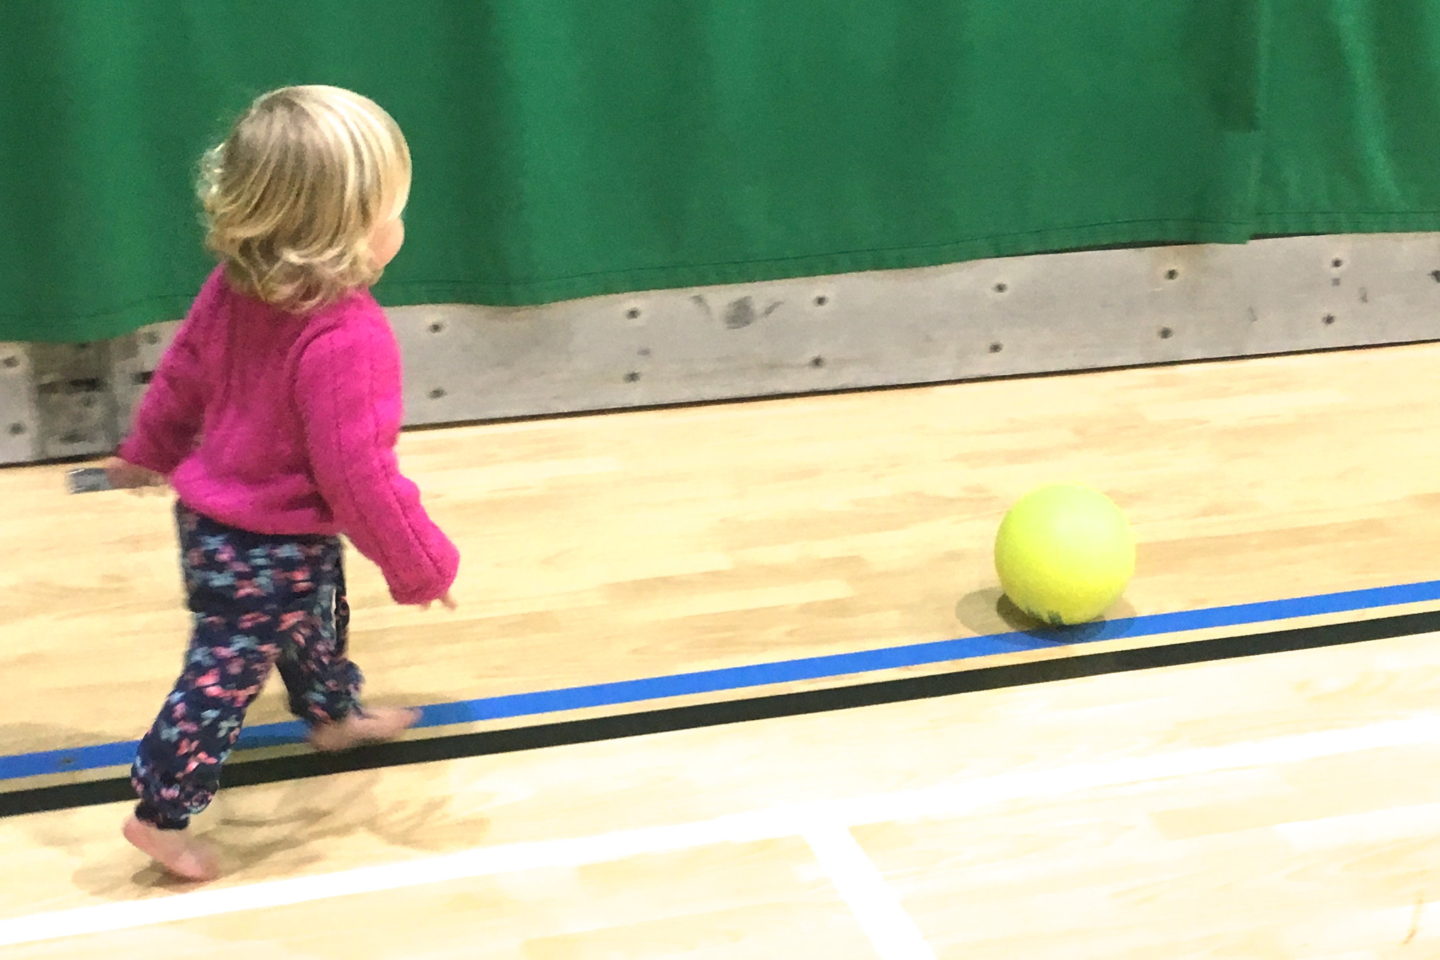 18 month old girl chasing ball in sports hall